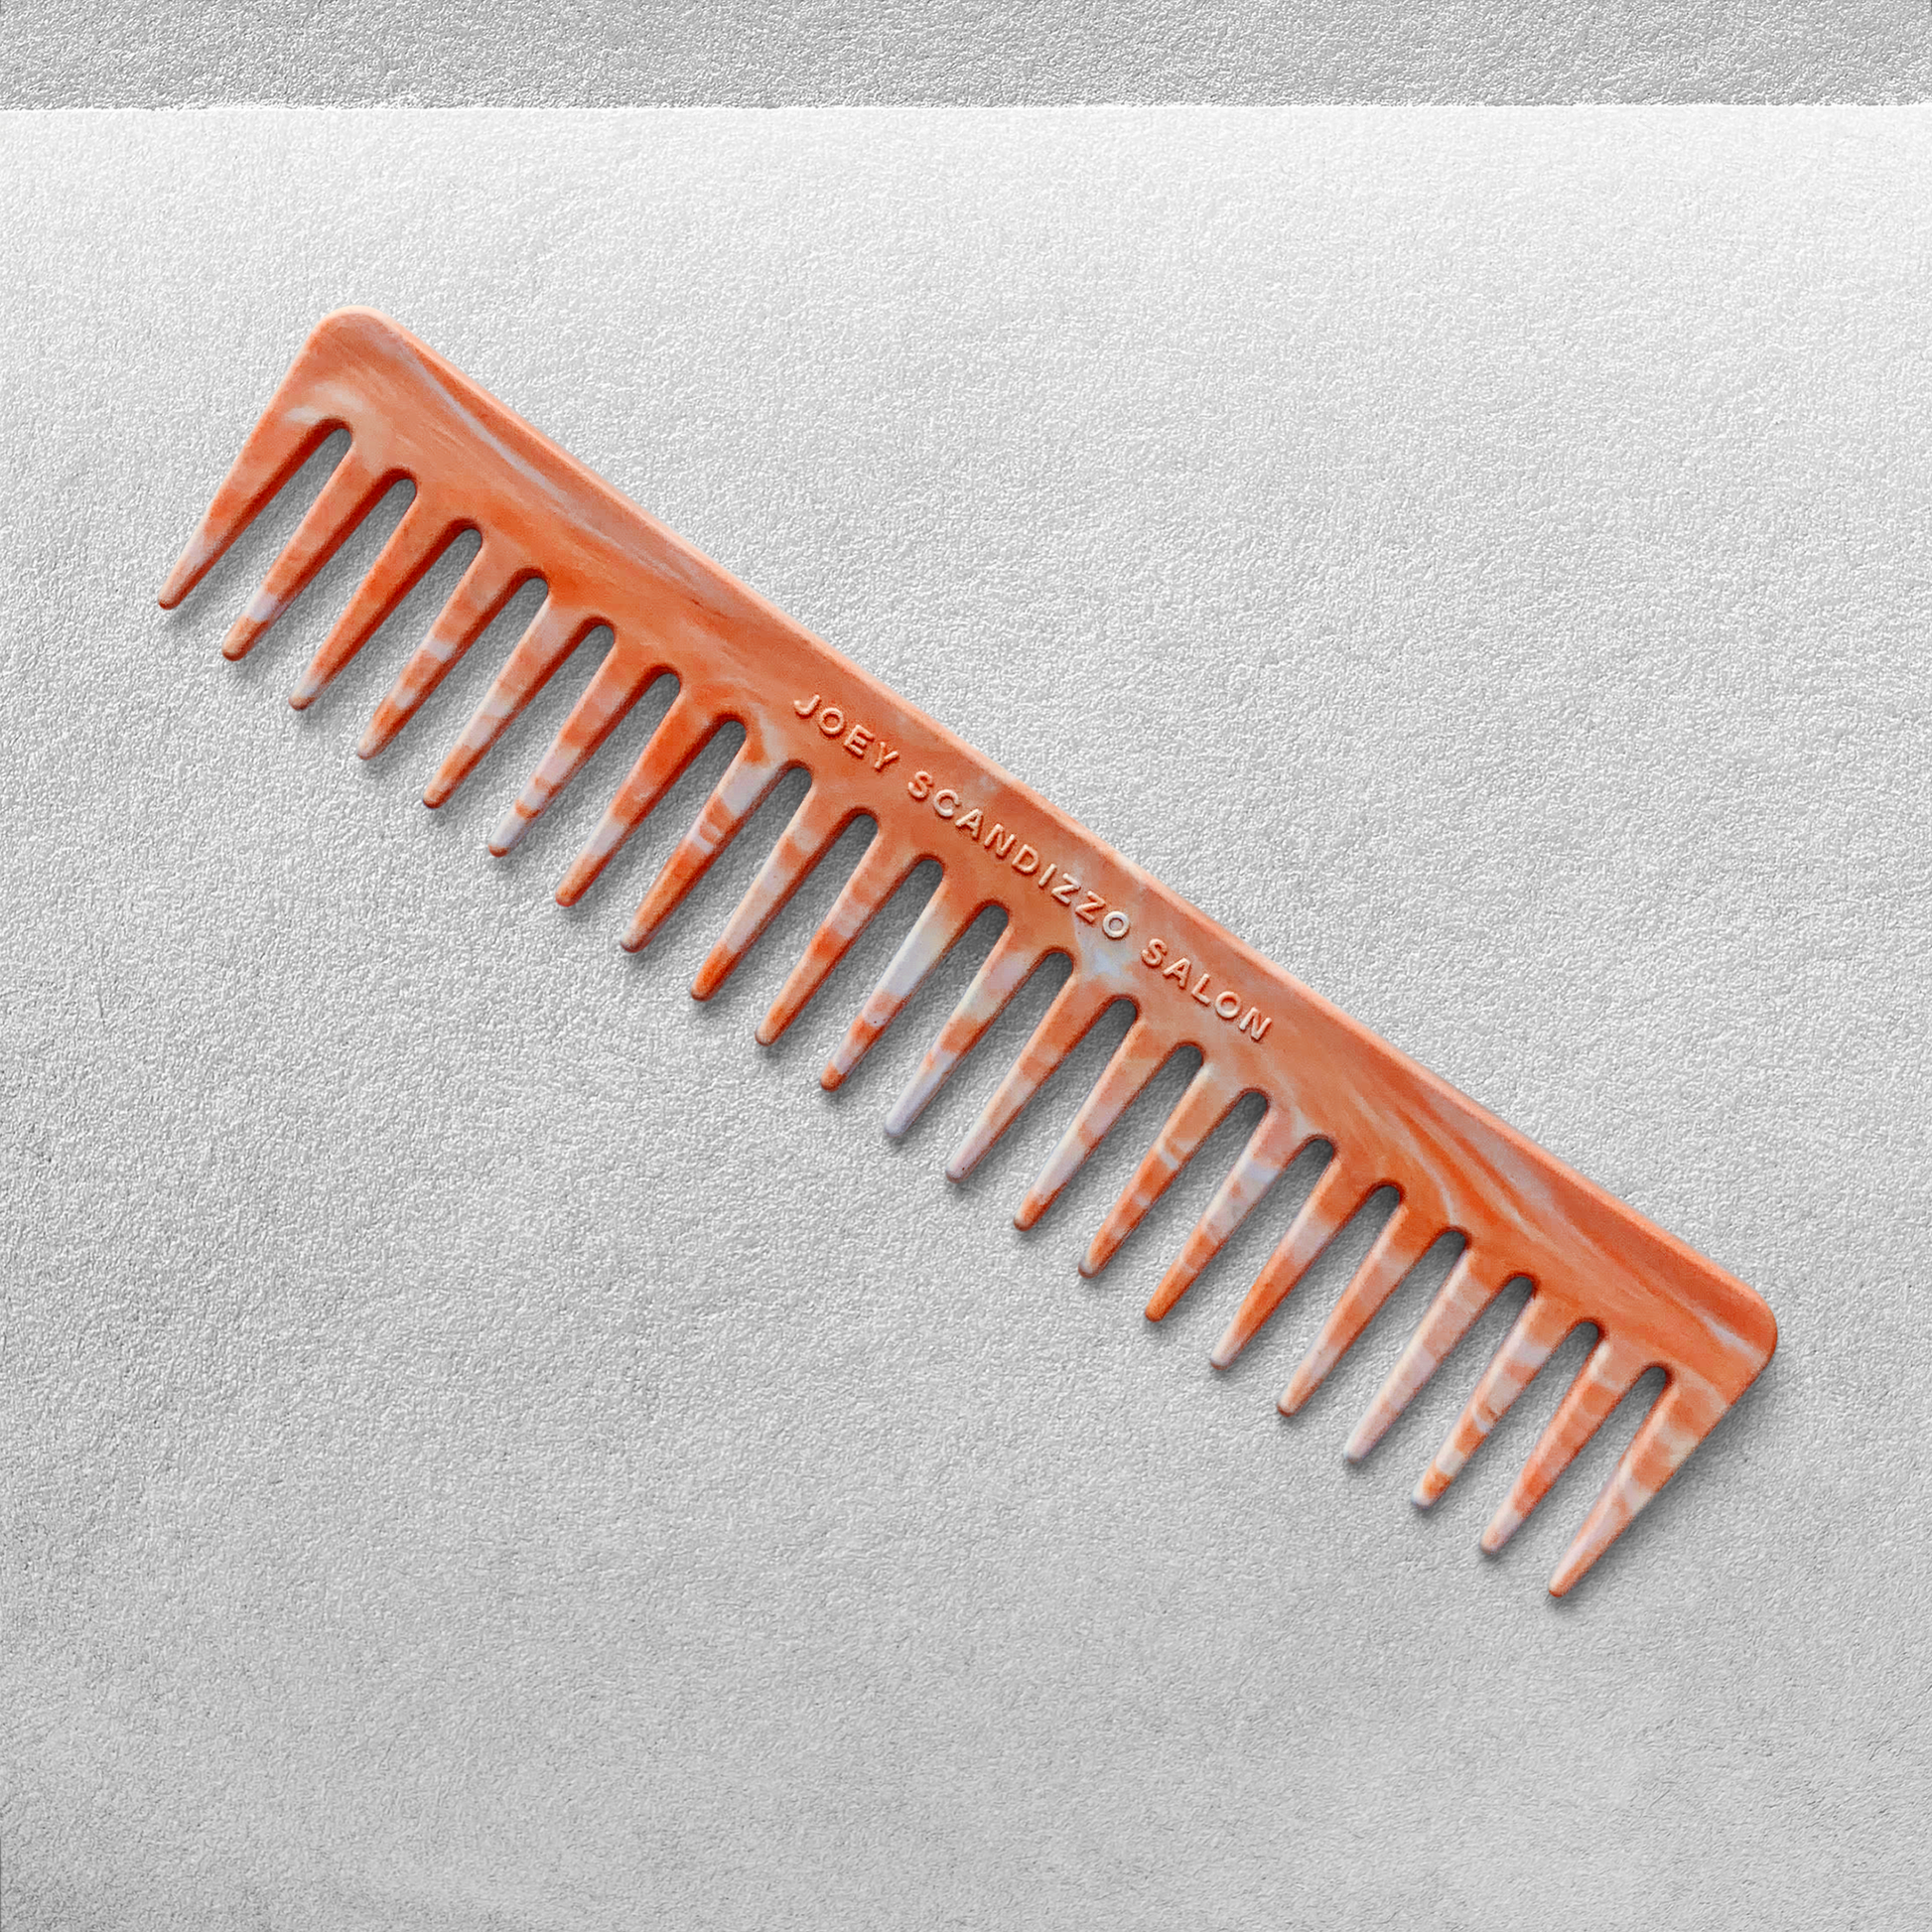 100% reclaimed / recycled plastic - wide tooth detangling comb made from bottle tops / caps